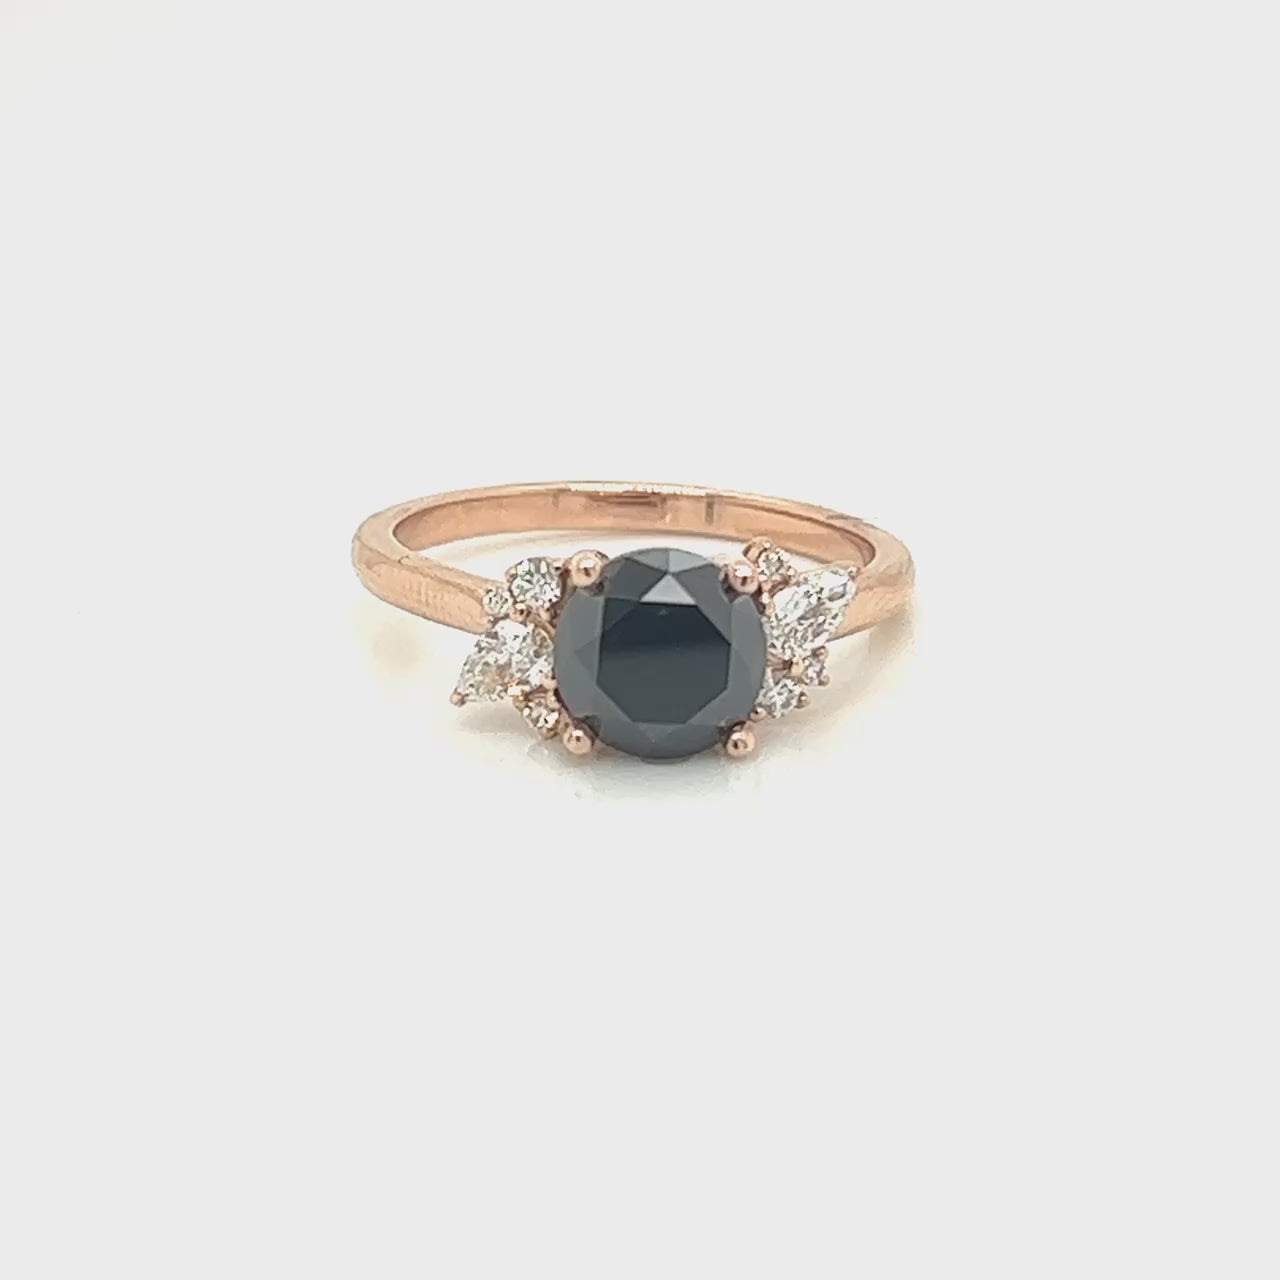 Sable Ring with a 2.20 Carat Round Black Salt and Pepper Diamond and White Accent Diamonds in 14k Rose Gold - Ready to Size and Ship